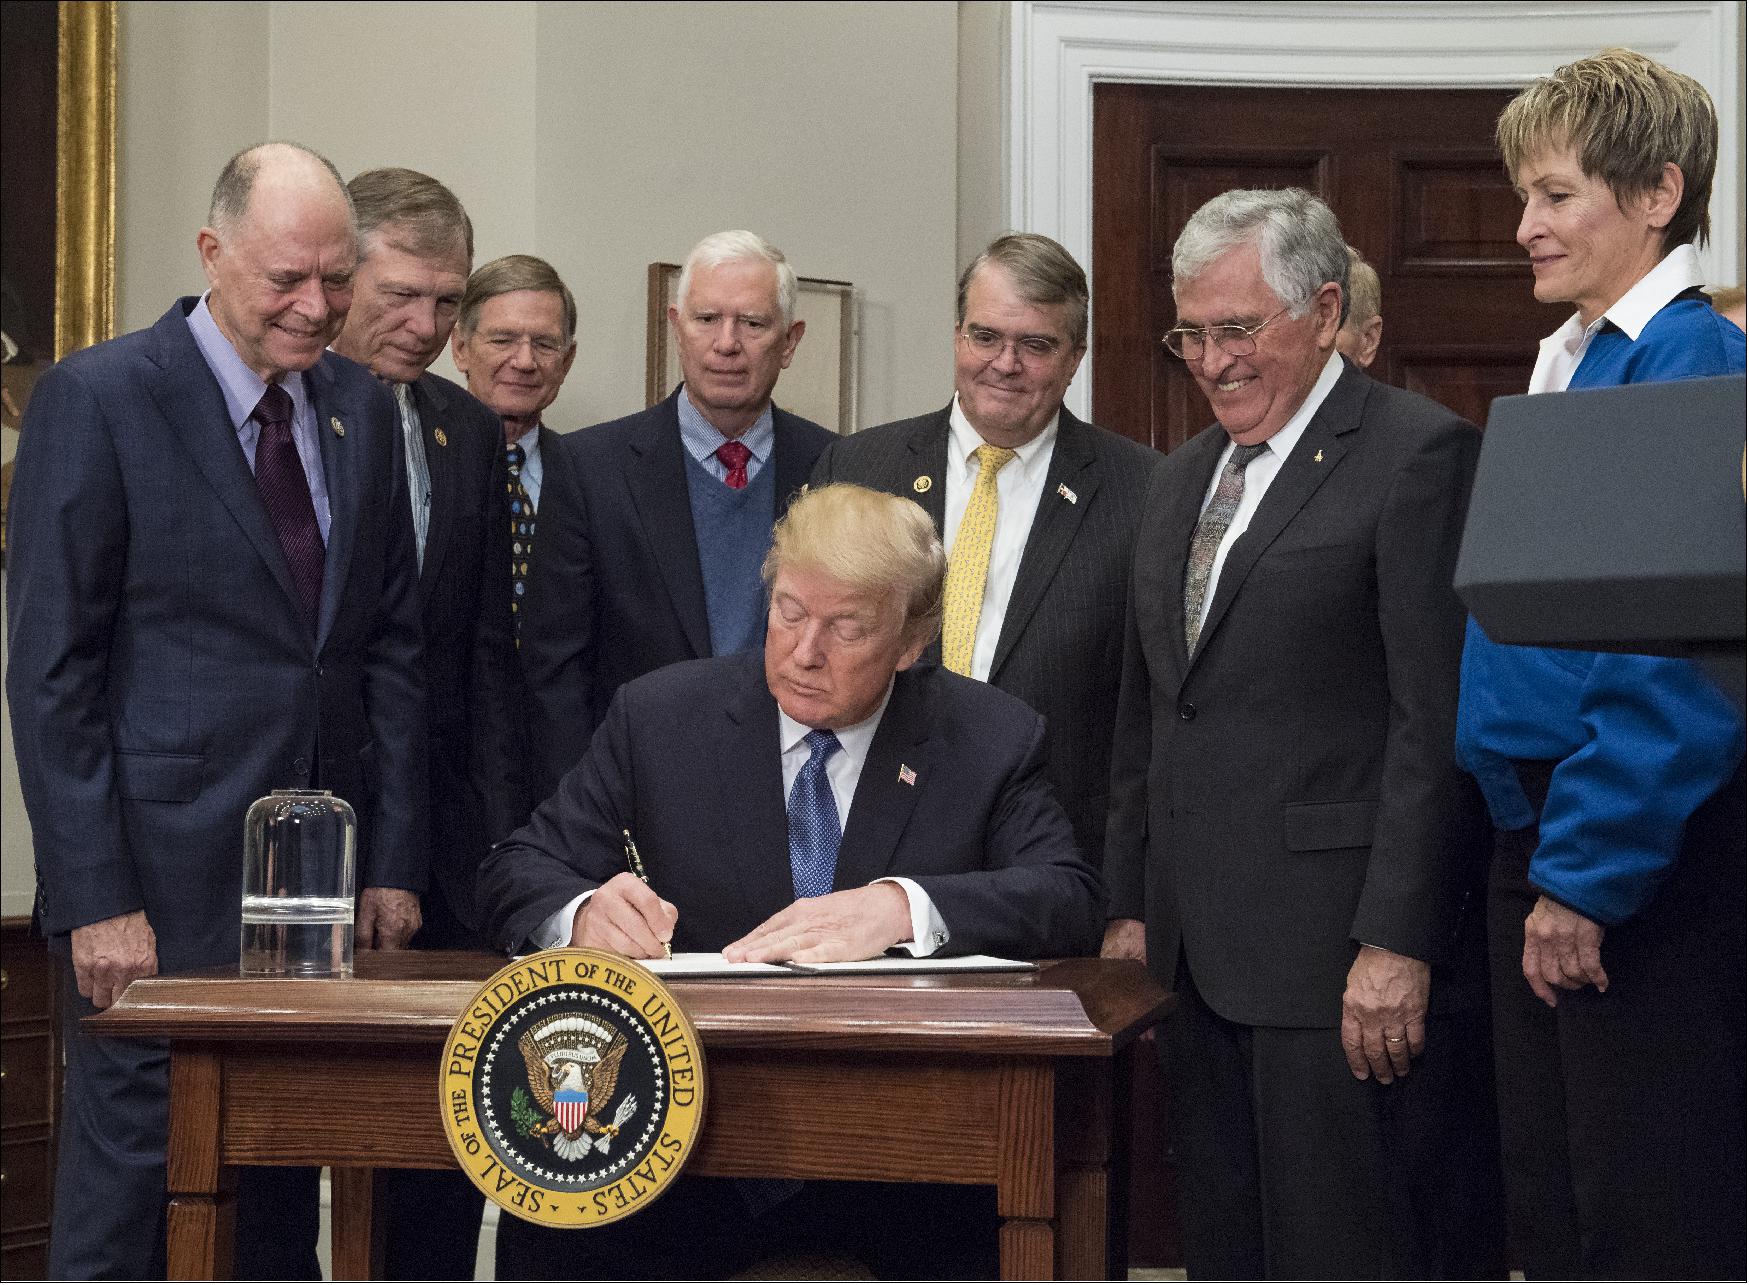 Figure 1: Representatives of Congress and the National Space Council joined President Donald J. Trump, Apollo astronaut Jack Schmitt and current NASA astronaut Peggy Whitson Monday, 11 December 2017, for the president’s signing of Space Policy Directive 1, a change in national space policy that provides for a U.S.-led, integrated program with private sector partners for a human return to the Moon, followed by missions to Mars and beyond (image credit: NASA/Aubrey Gemignani)